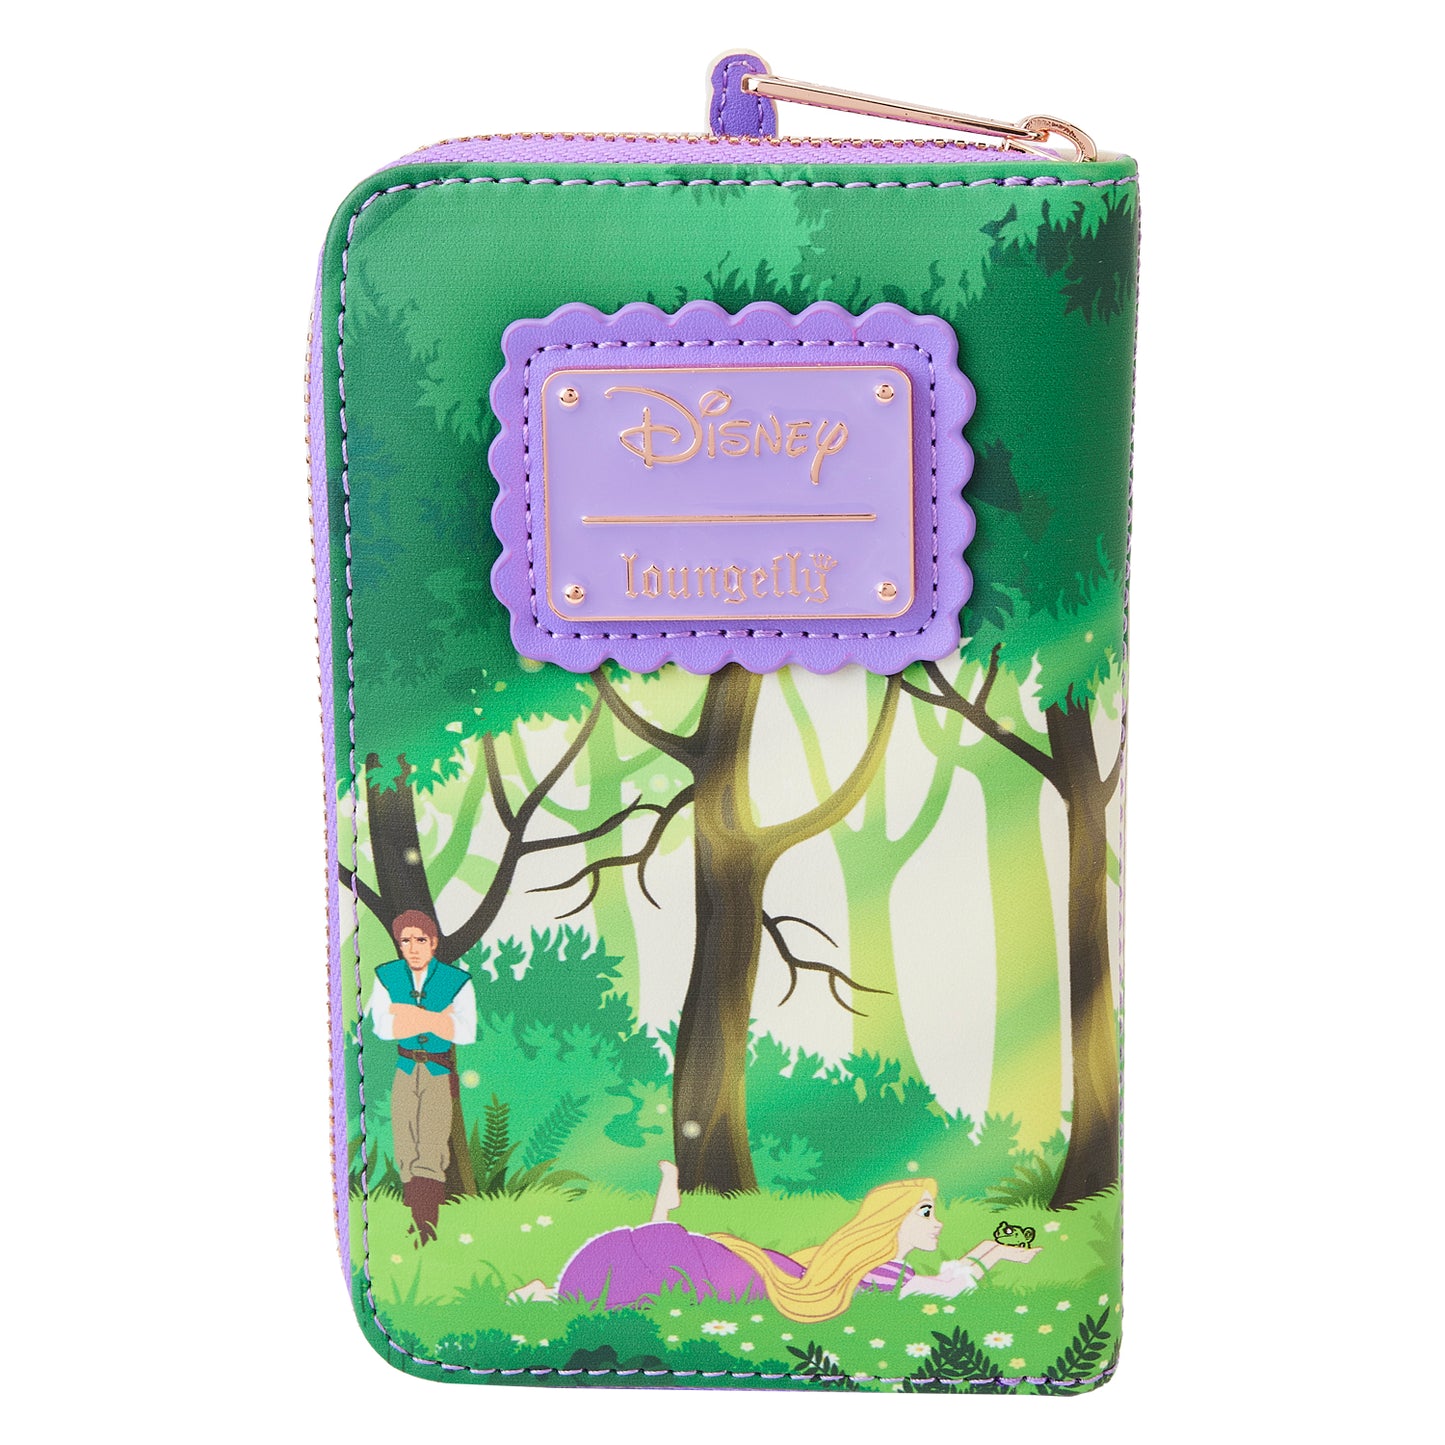 Tangled Rapunzel Swinging from the Tower Zip-Around Wallet